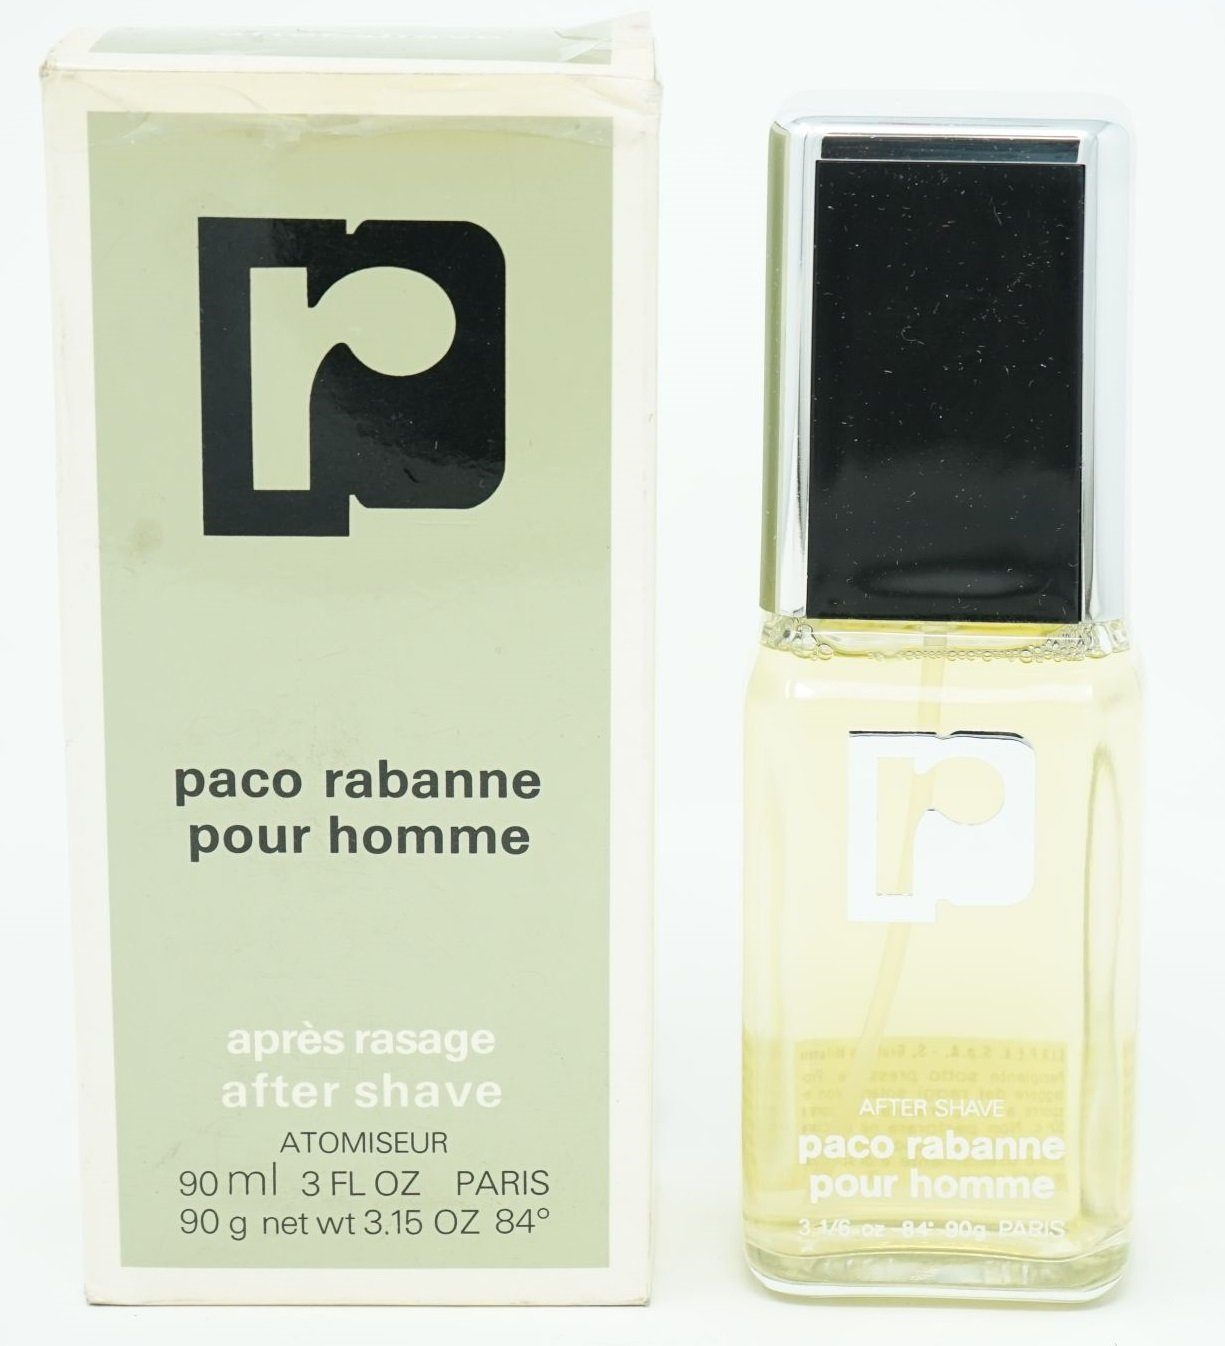 paco rabanne After-Shave Paco Rabanne Pour Homme After Shave Atomiseur 90 ml | Aftershaves